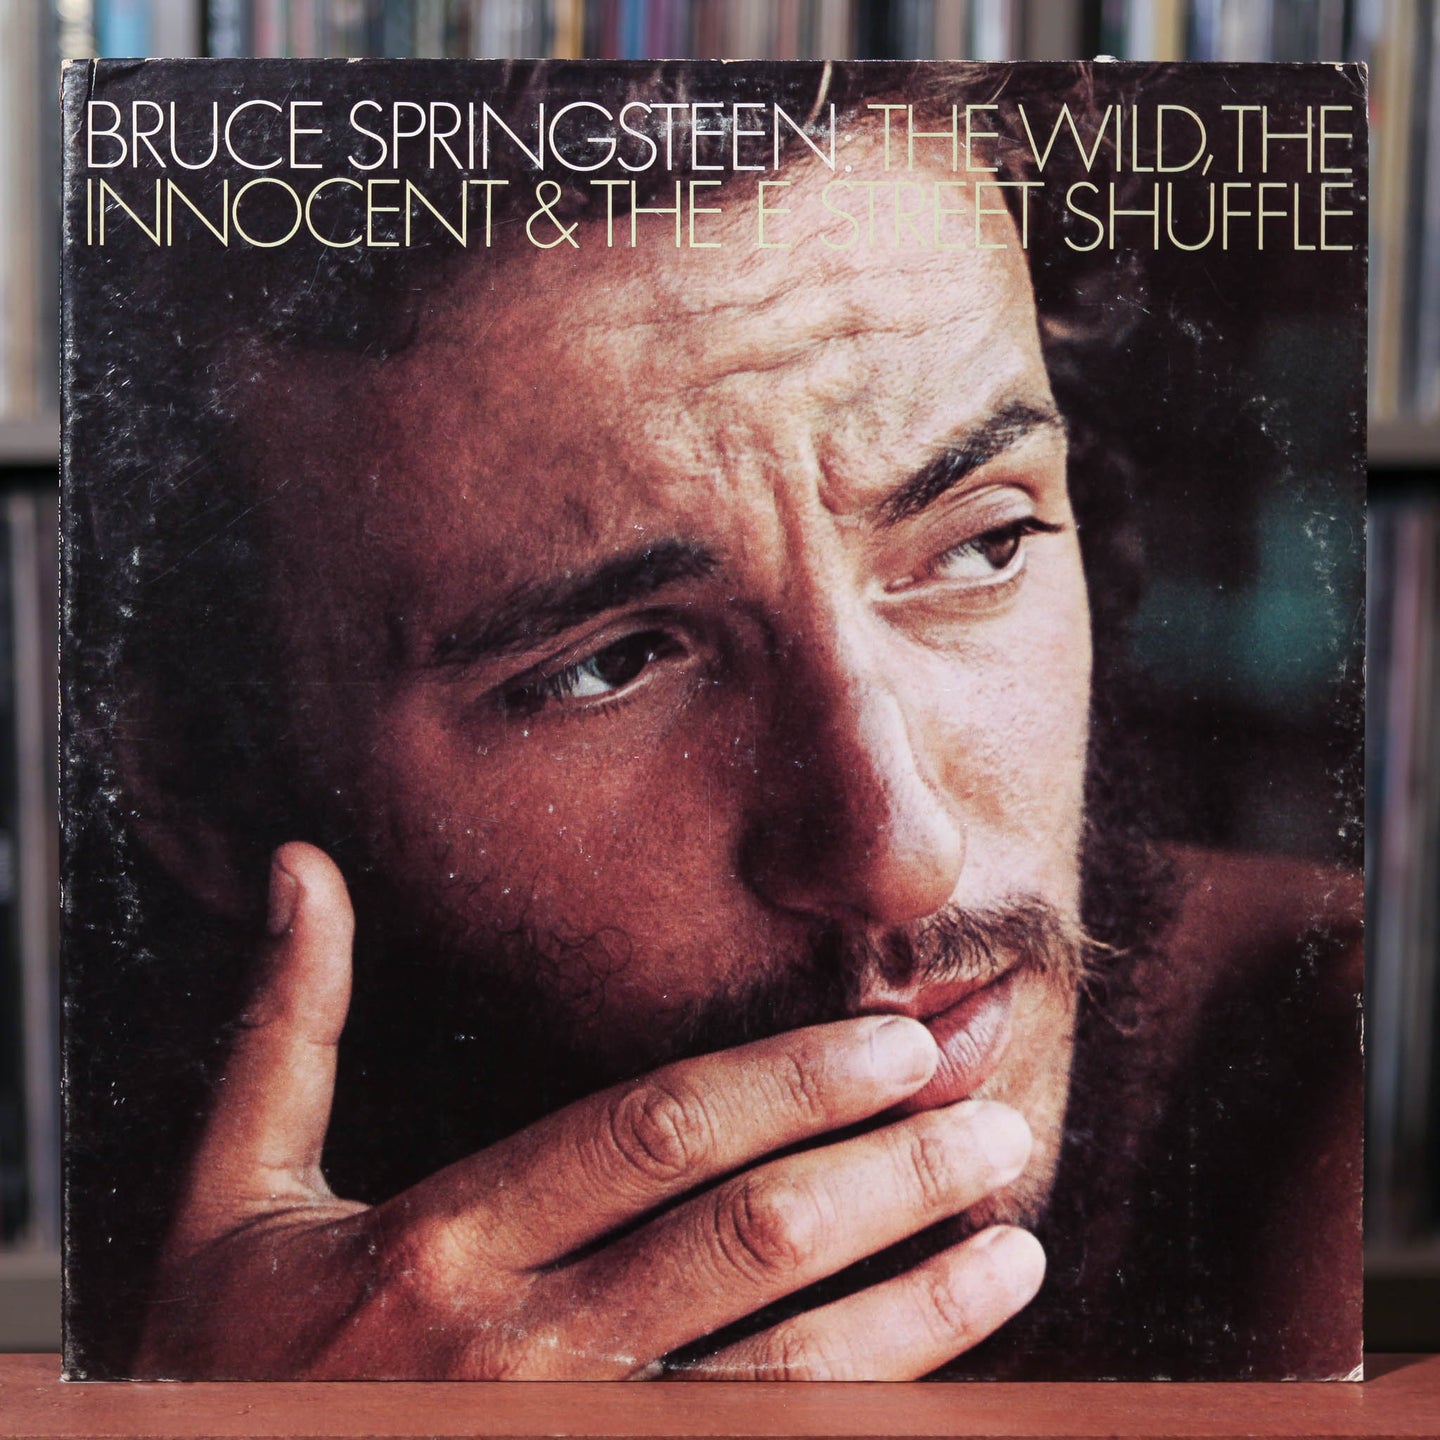 Bruce Springsteen - The Wild, The Innocent & The E Street Shuffle - 1975  Columbia, VG/VG+